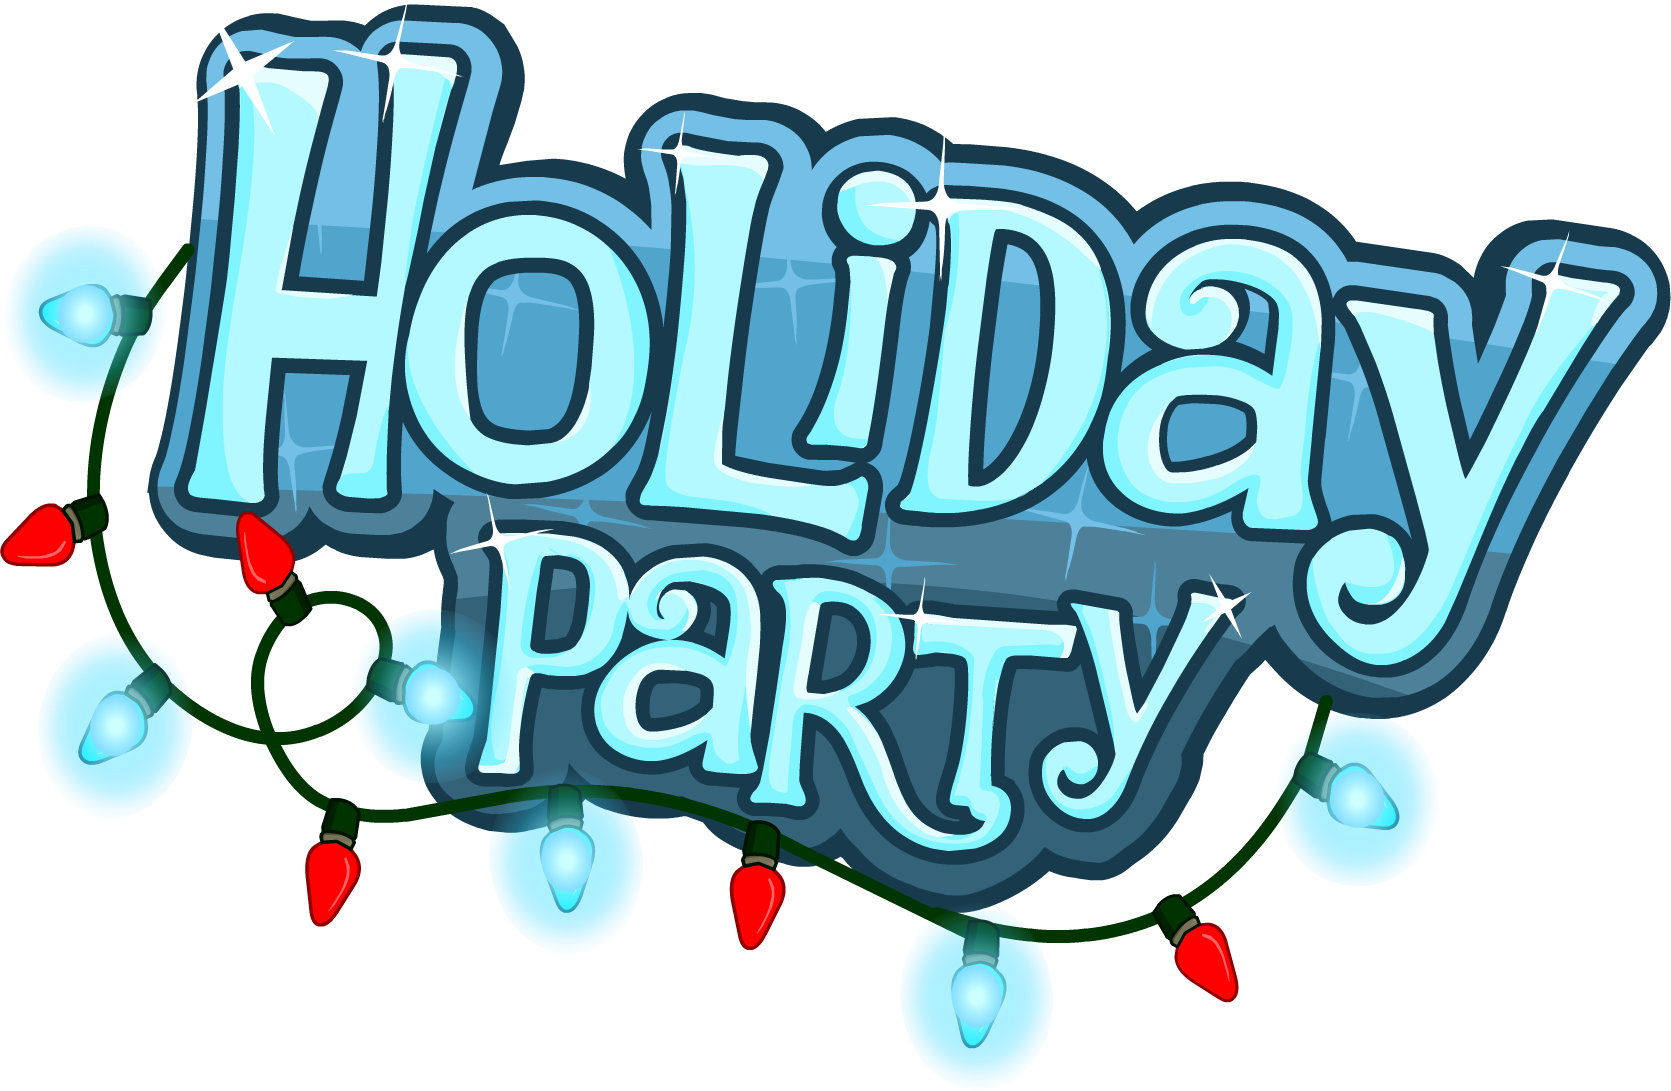 Holiday Party Clip Art - ClipArt Best